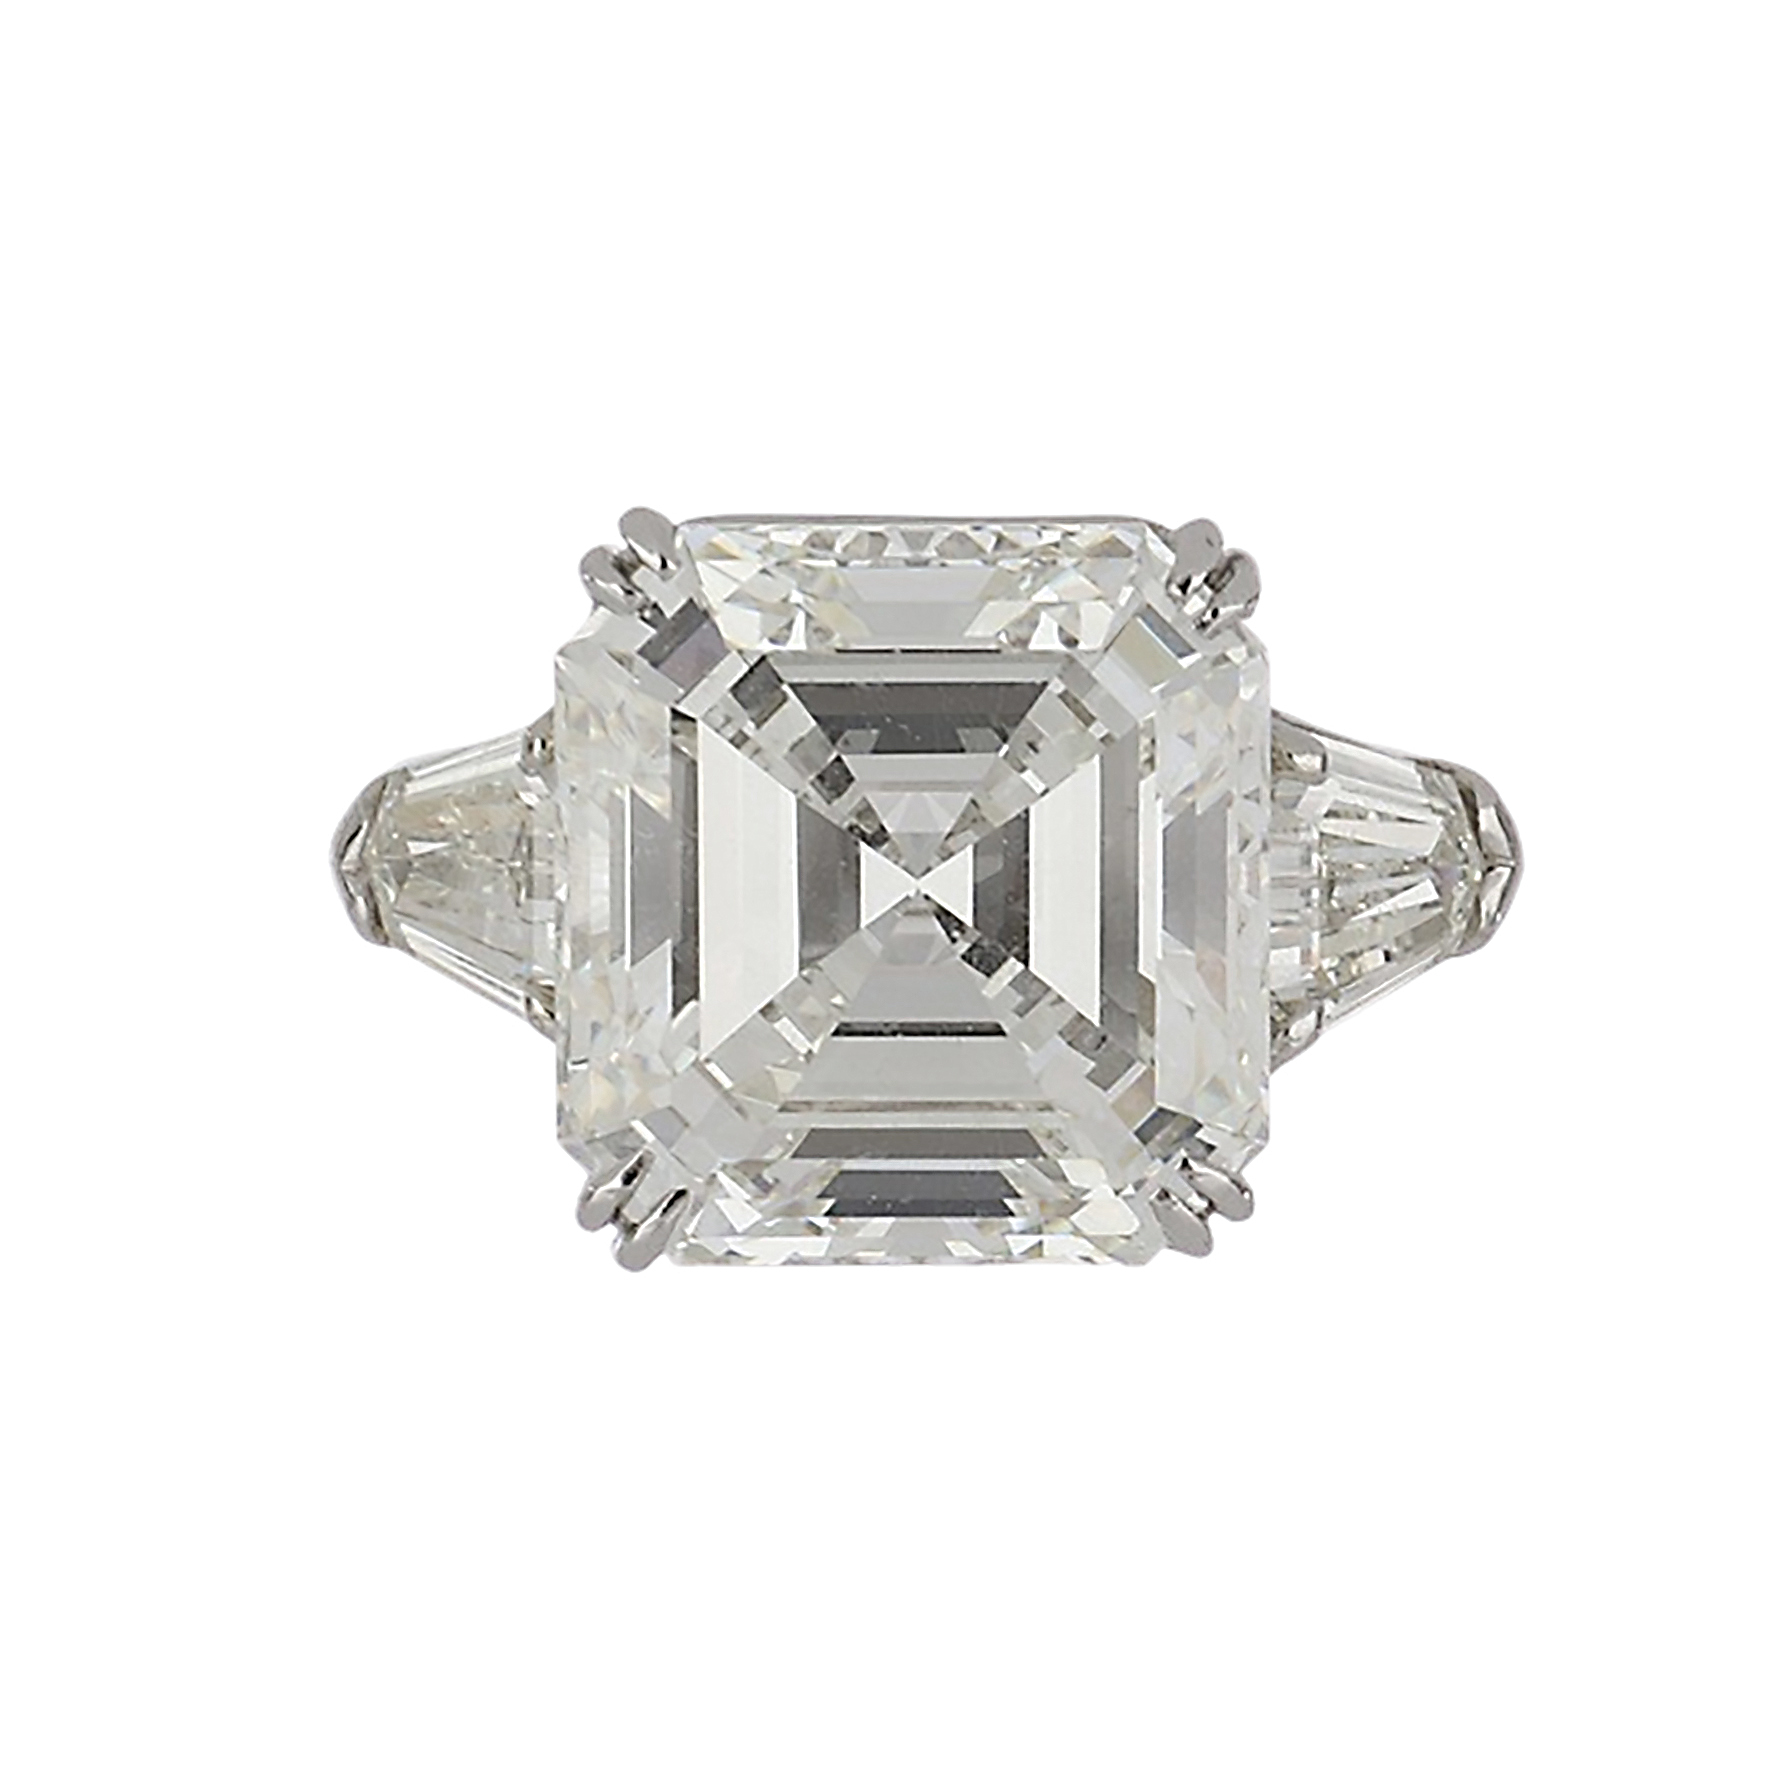 A square emerald-cut engagement ring from luxury jeweler, Tenenbaum Jewelers in Houston, TX.